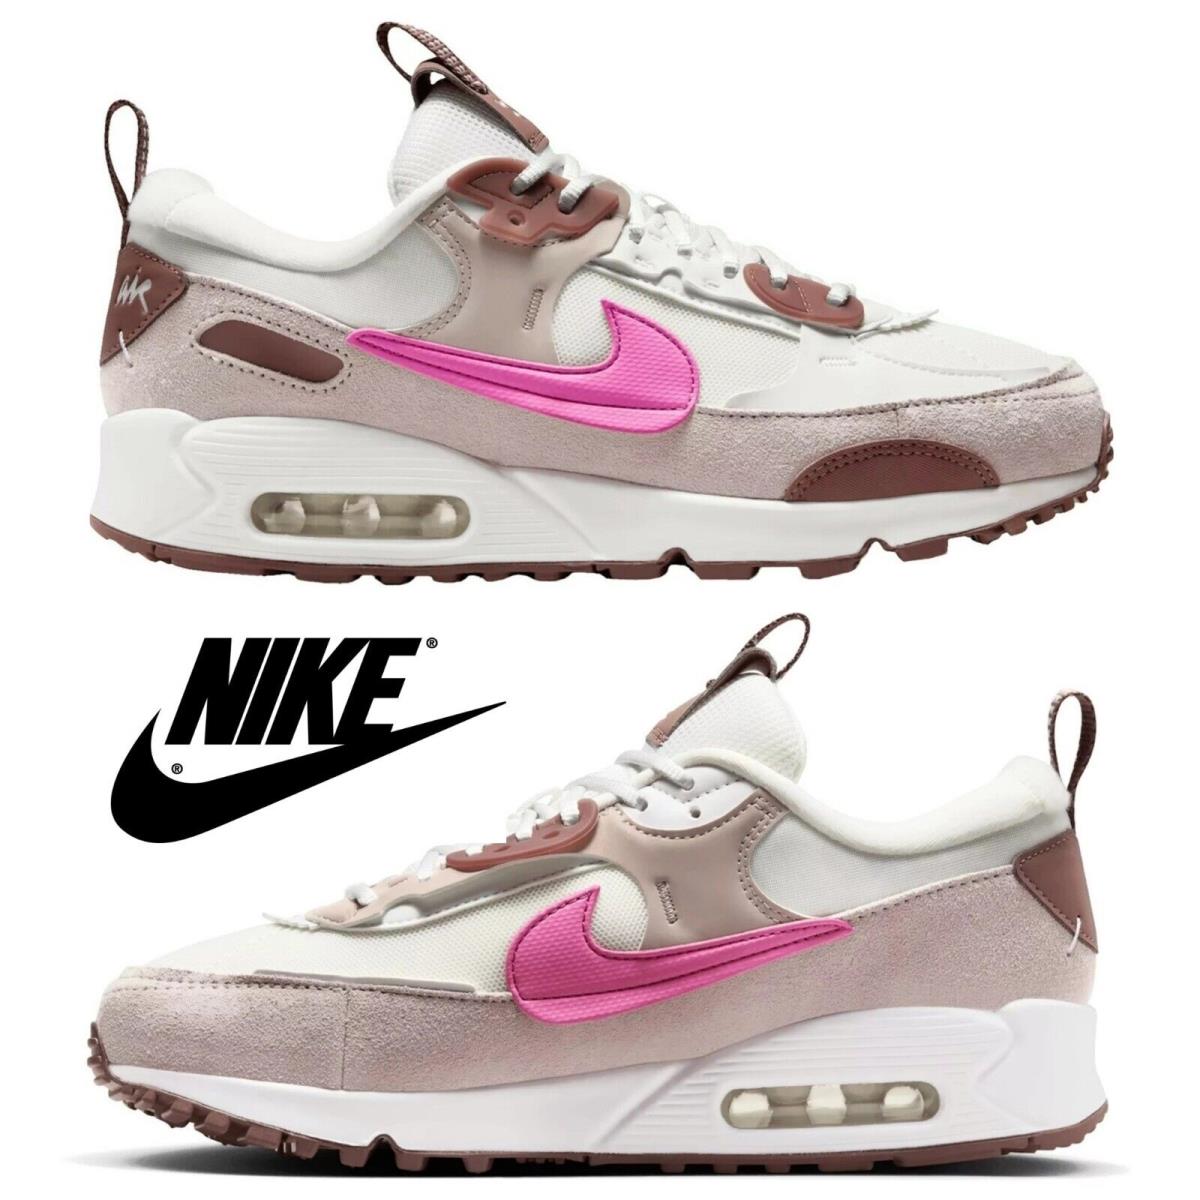 Nike Air Max 90 Futura Women`s Sneakers Sport Running Gym Comfort Athletic Shoes